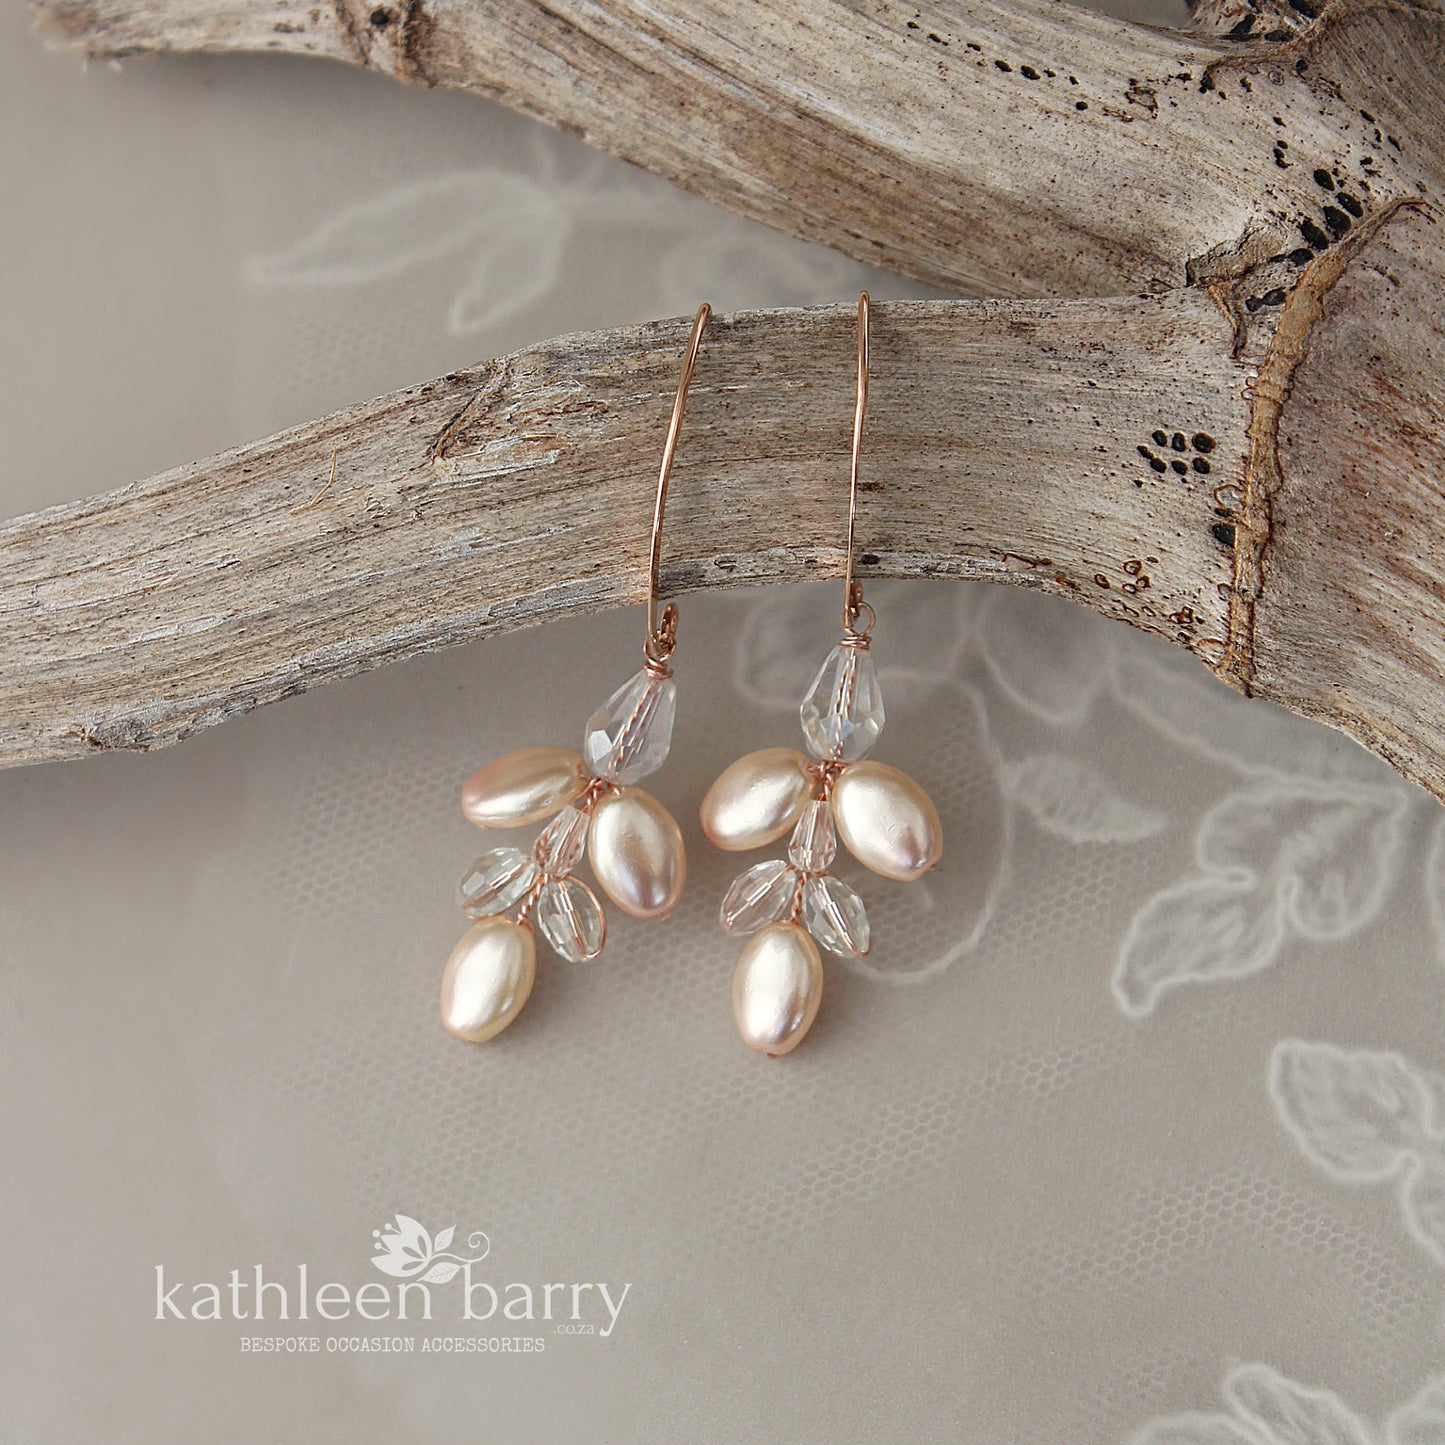 Tamara pearl crystal chandelier earrings pink or ivory - Options : Silver, pale gold or rose gold